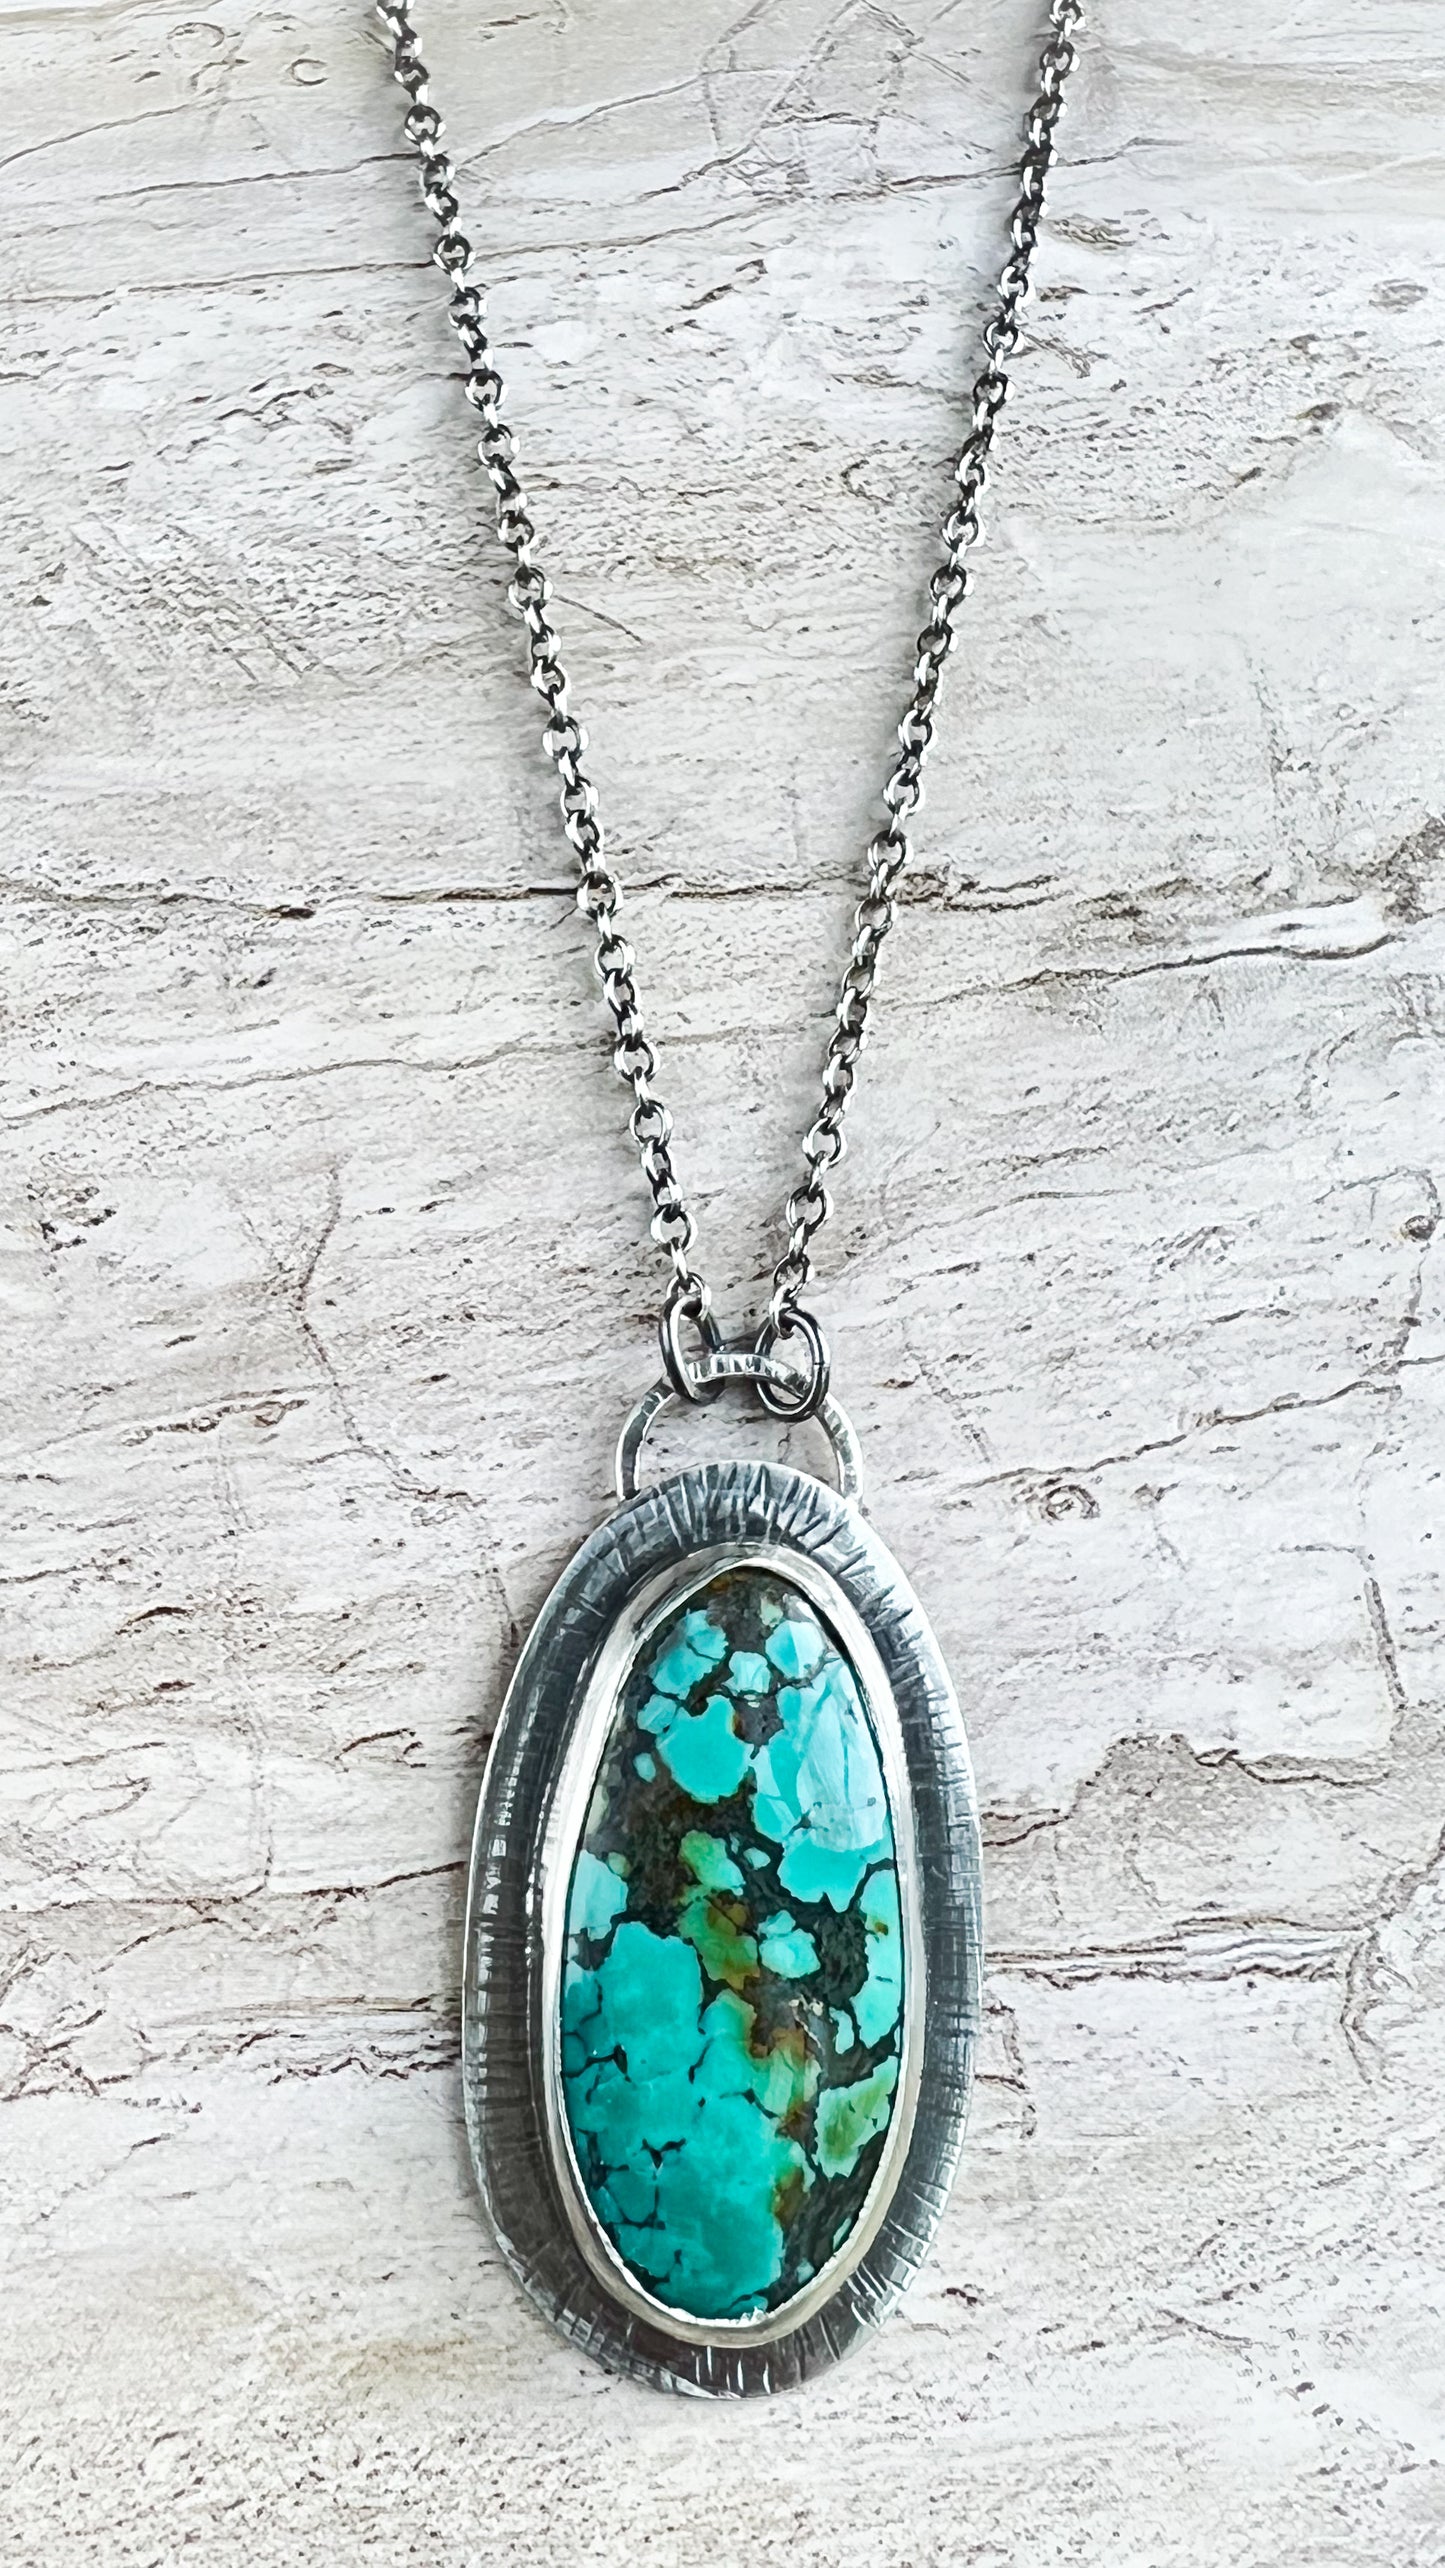 Rustic Turquoise Pendant Necklace